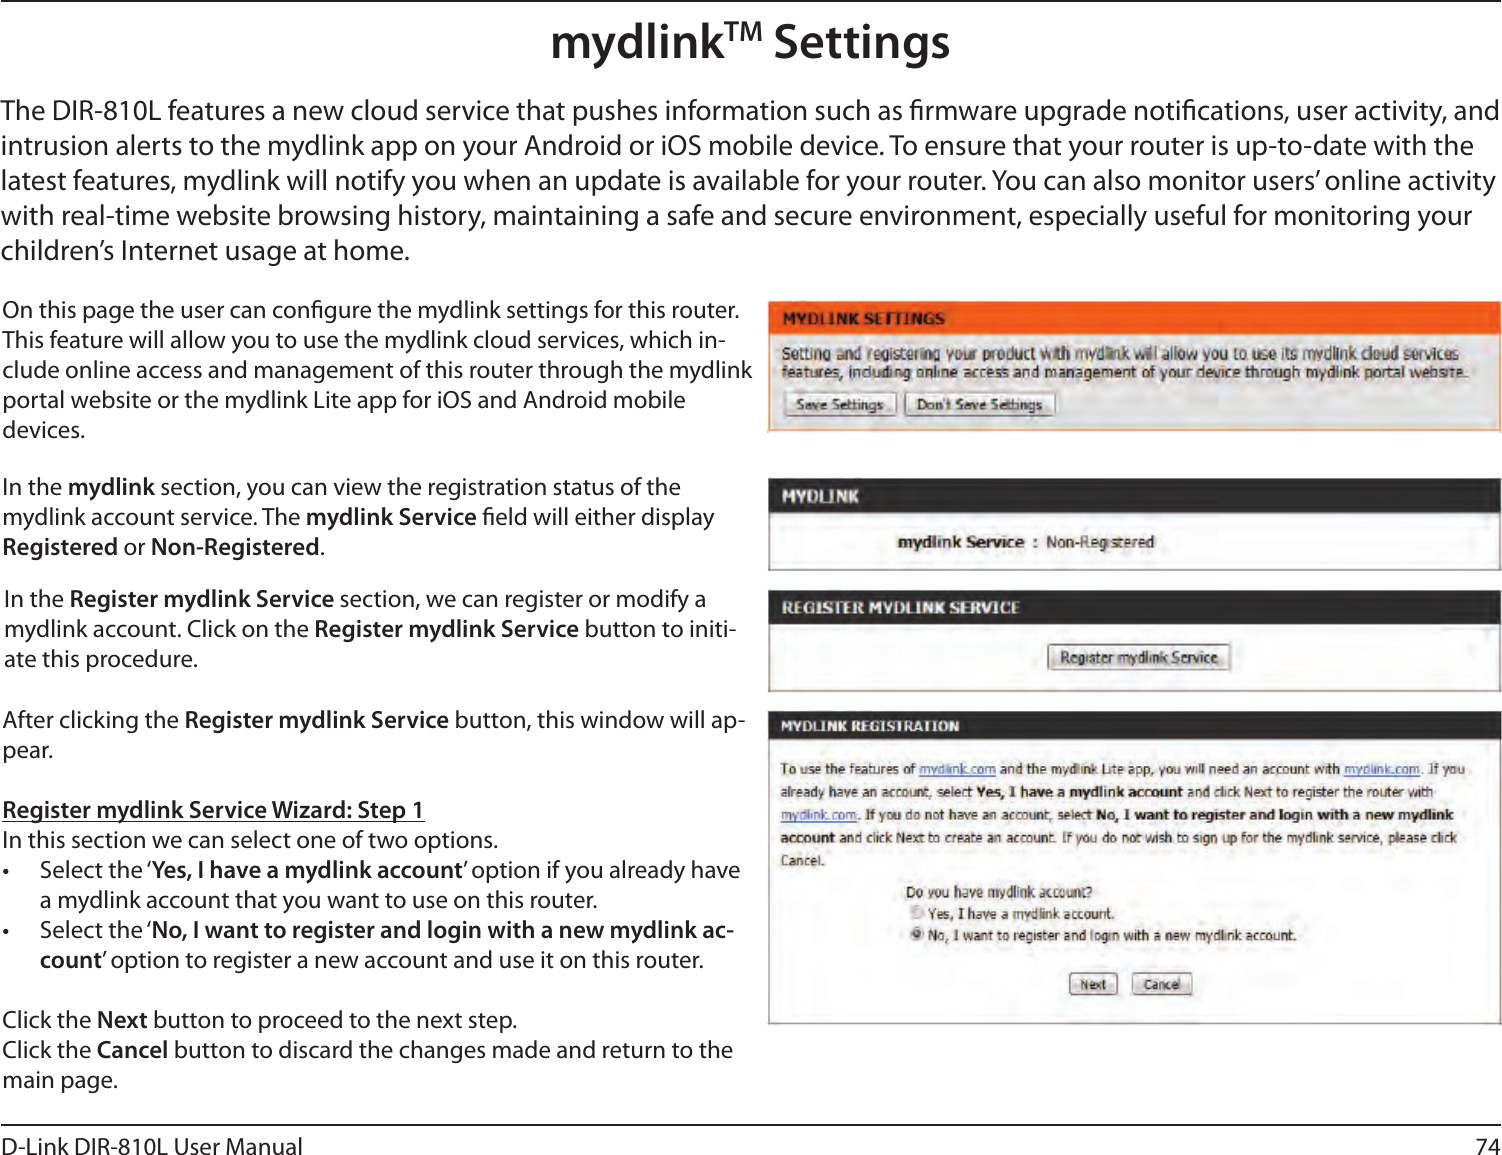 74D-Link DIR-810L User ManualmydlinkTM SettingsOn this page the user can congure the mydlink settings for this router. This feature will allow you to use the mydlink cloud services, which in-clude online access and management of this router through the mydlink portal website or the mydlink Lite app for iOS and Android mobile devices.In the mydlink section, you can view the registration status of the mydlink account service. The mydlink Service eld will either display Registered or Non-Registered.In the Register mydlink Service section, we can register or modify a mydlink account. Click on the Register mydlink Service button to initi-ate this procedure.After clicking the Register mydlink Service button, this window will ap-pear.Register mydlink Service Wizard: Step 1In this section we can select one of two options.•  Select the ‘Yes, I have a mydlink account’ option if you already have a mydlink account that you want to use on this router. •  Select the ‘No, I want to register and login with a new mydlink ac-count’ option to register a new account and use it on this router.Click the Next button to proceed to the next step. Click the Cancel button to discard the changes made and return to the main page.The DIR-810L features a new cloud service that pushes information such as rmware upgrade notications, user activity, and intrusion alerts to the mydlink app on your Android or iOS mobile device. To ensure that your router is up-to-date with the latest features, mydlink will notify you when an update is available for your router. You can also monitor users’ online activity with real-time website browsing history, maintaining a safe and secure environment, especially useful for monitoring your children’s Internet usage at home.